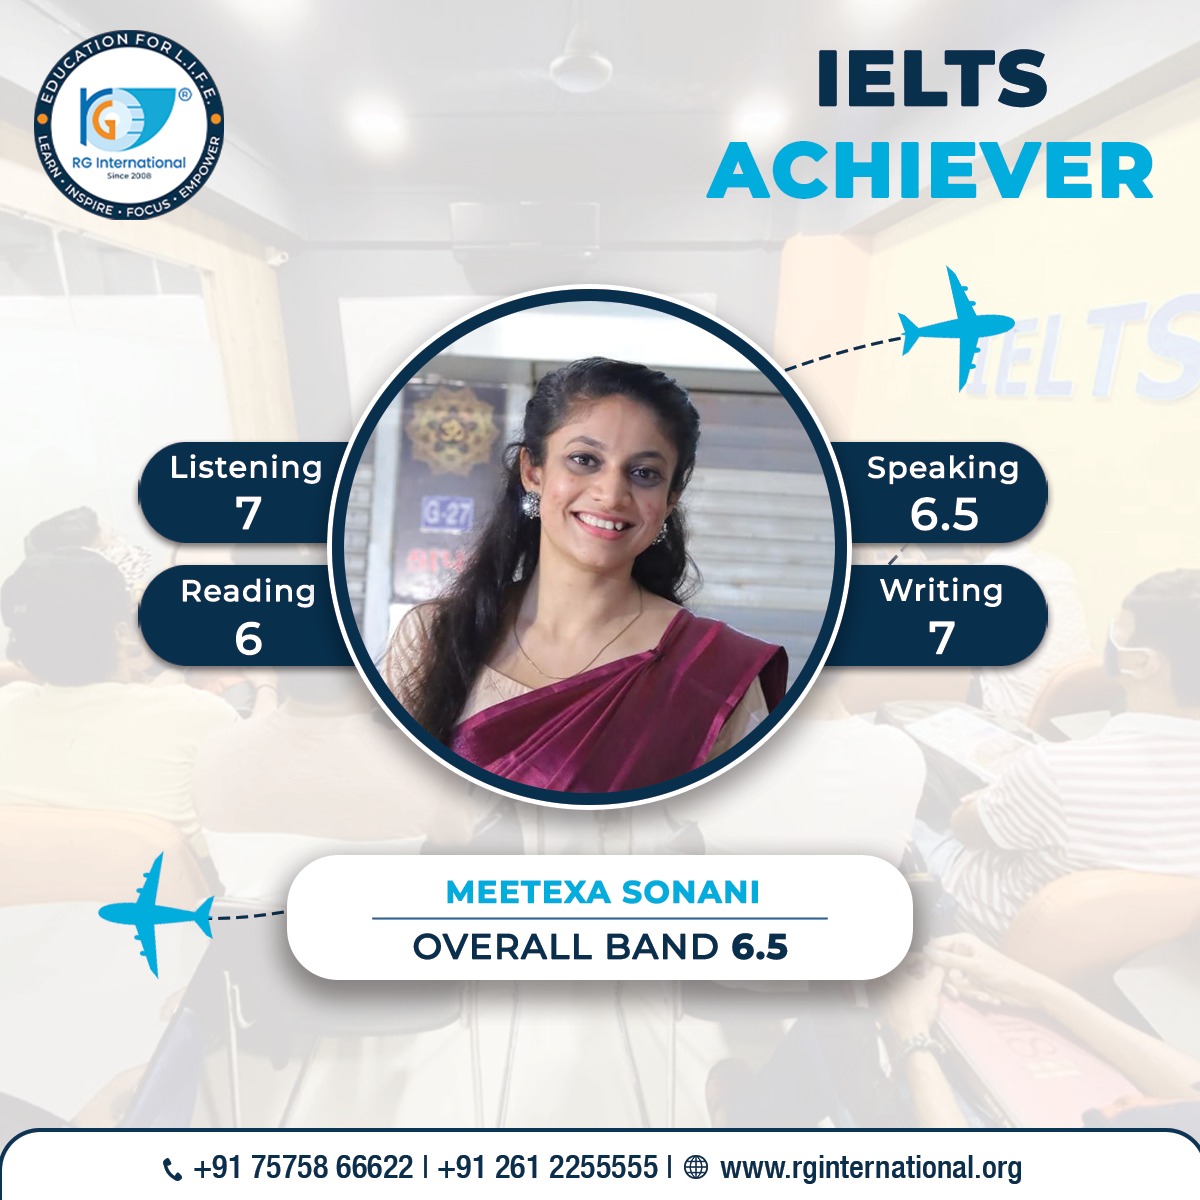 Meetexa Sonani, an IELTS achiever, shines with an Overall Band 6.5! 
RG International congratulates her on this significant accomplishment and encourages her to keep pushing for even greater success.
#rginternational #ielts #ieltspreparation #ieltsexam #ieltstest #ieltsclass